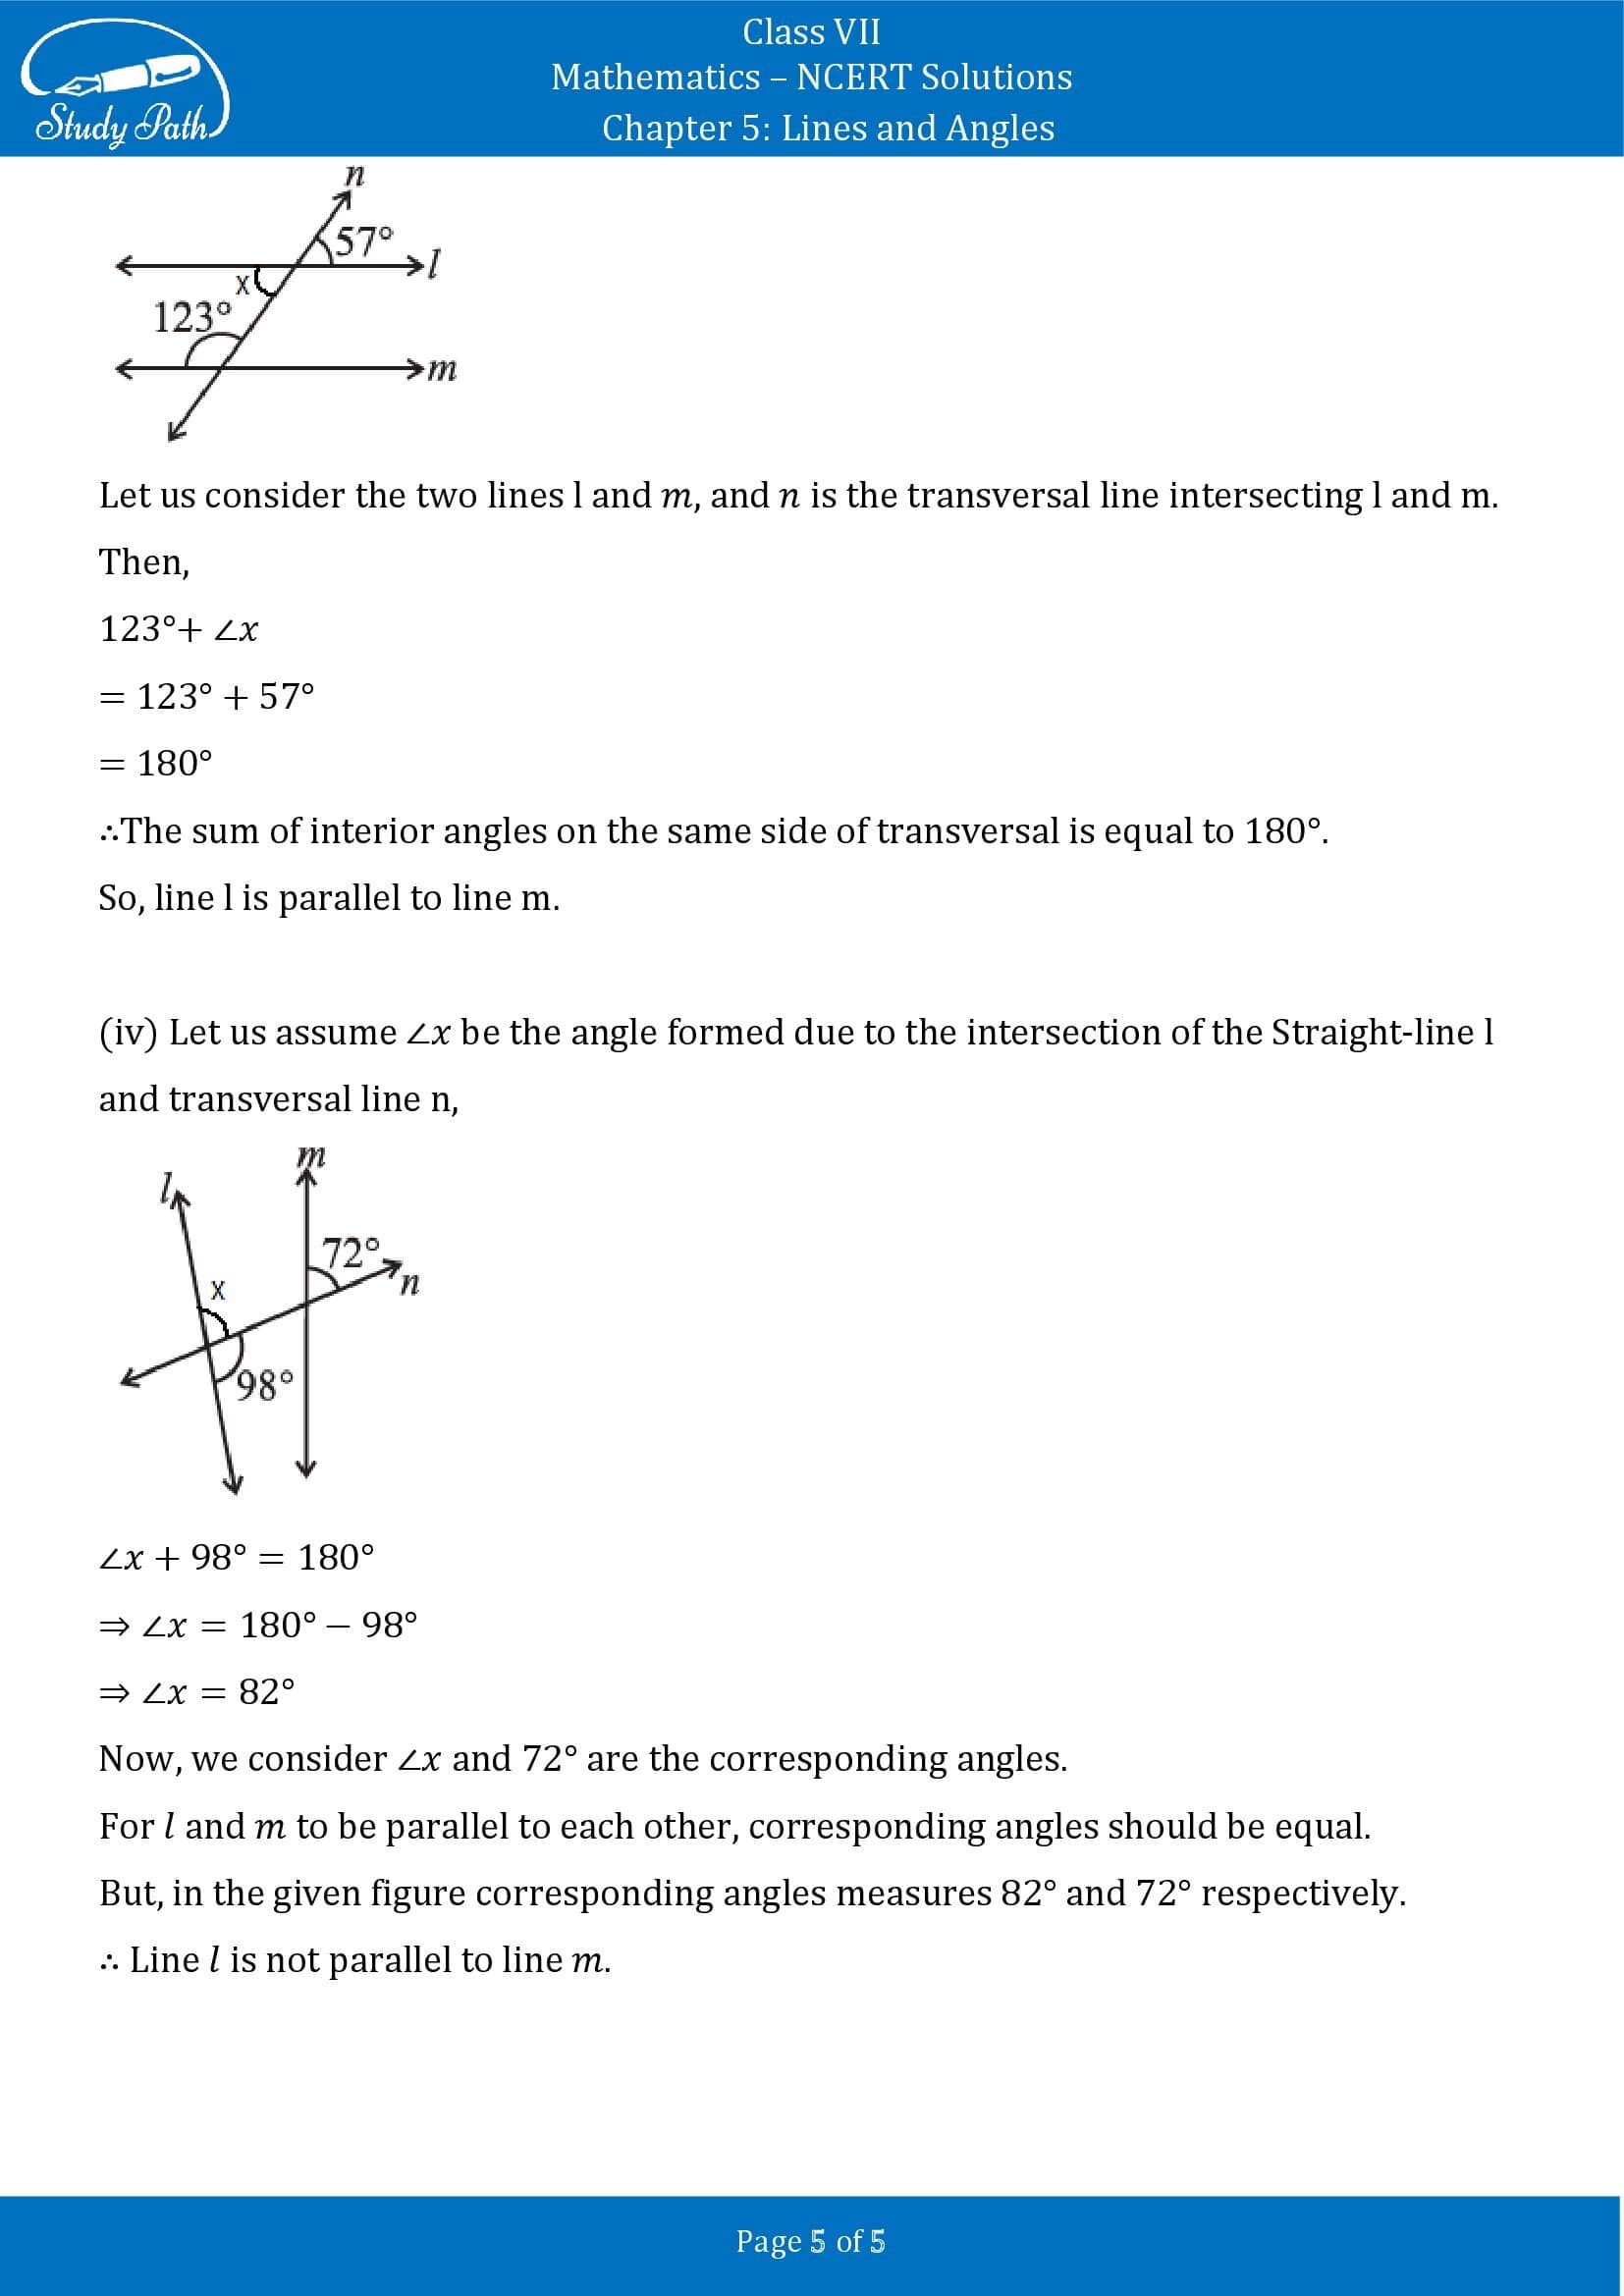 NCERT Solutions for Class 7 Maths Chapter 5 Lines and Angles Exercise 5.2 00005